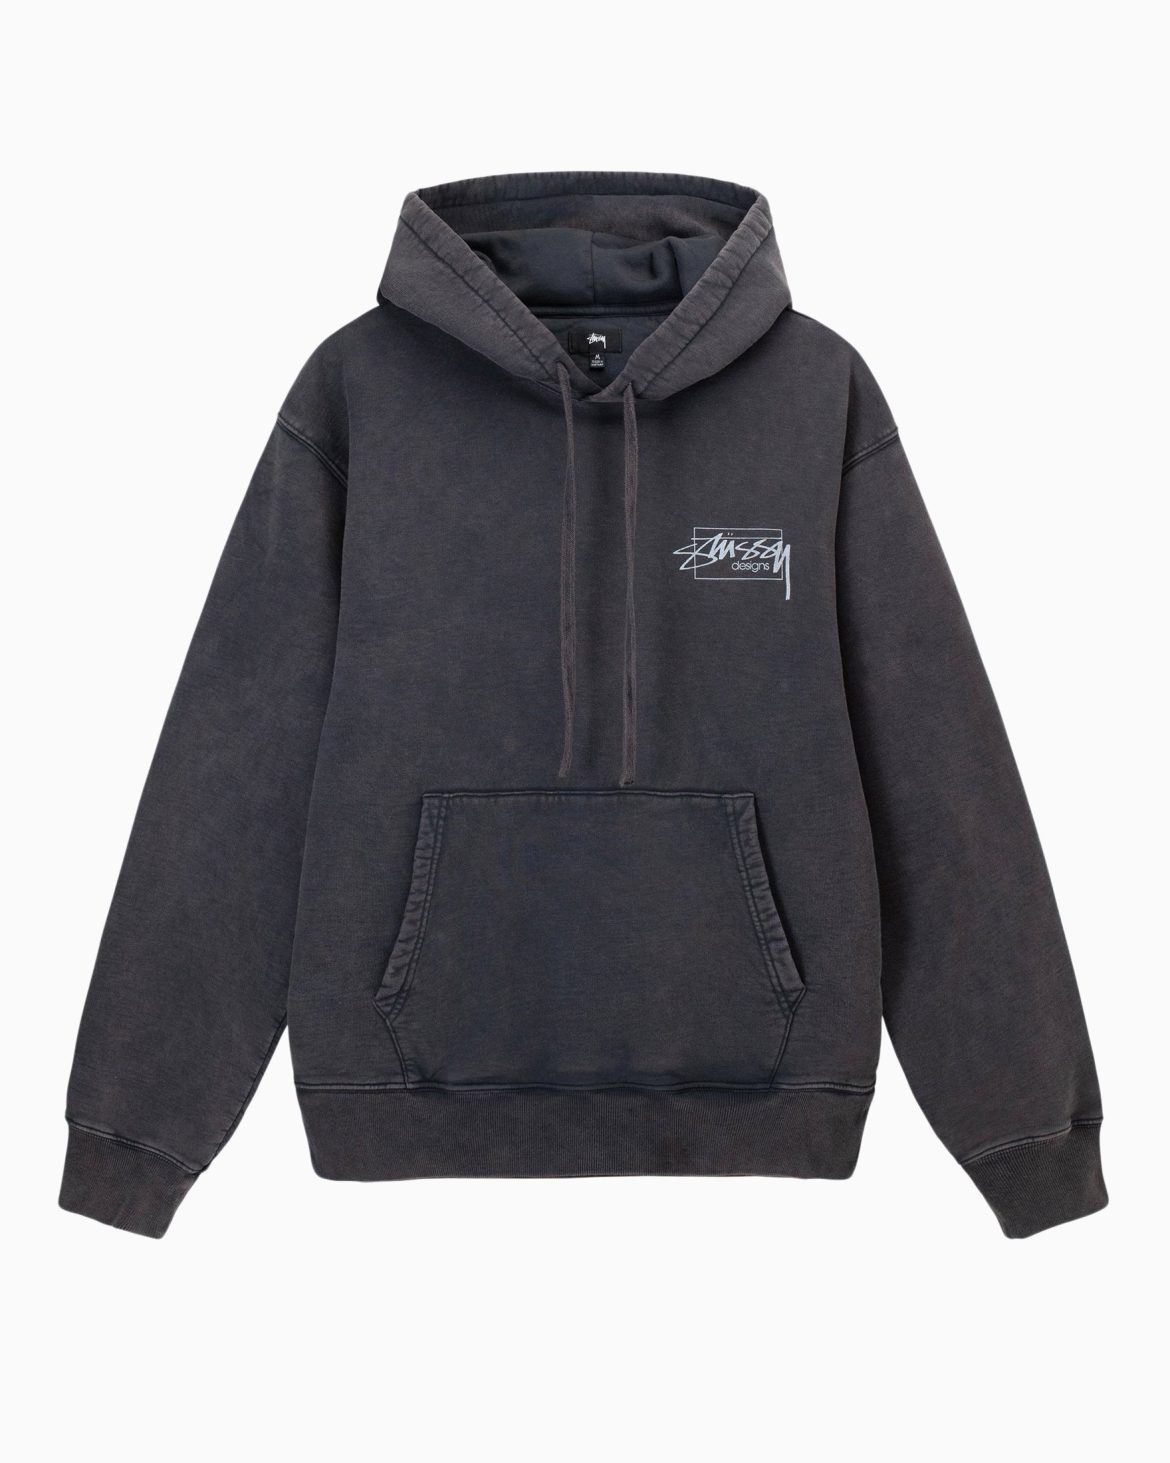 Versatile Wardrobe Stussy Hoodies for Any Occasion